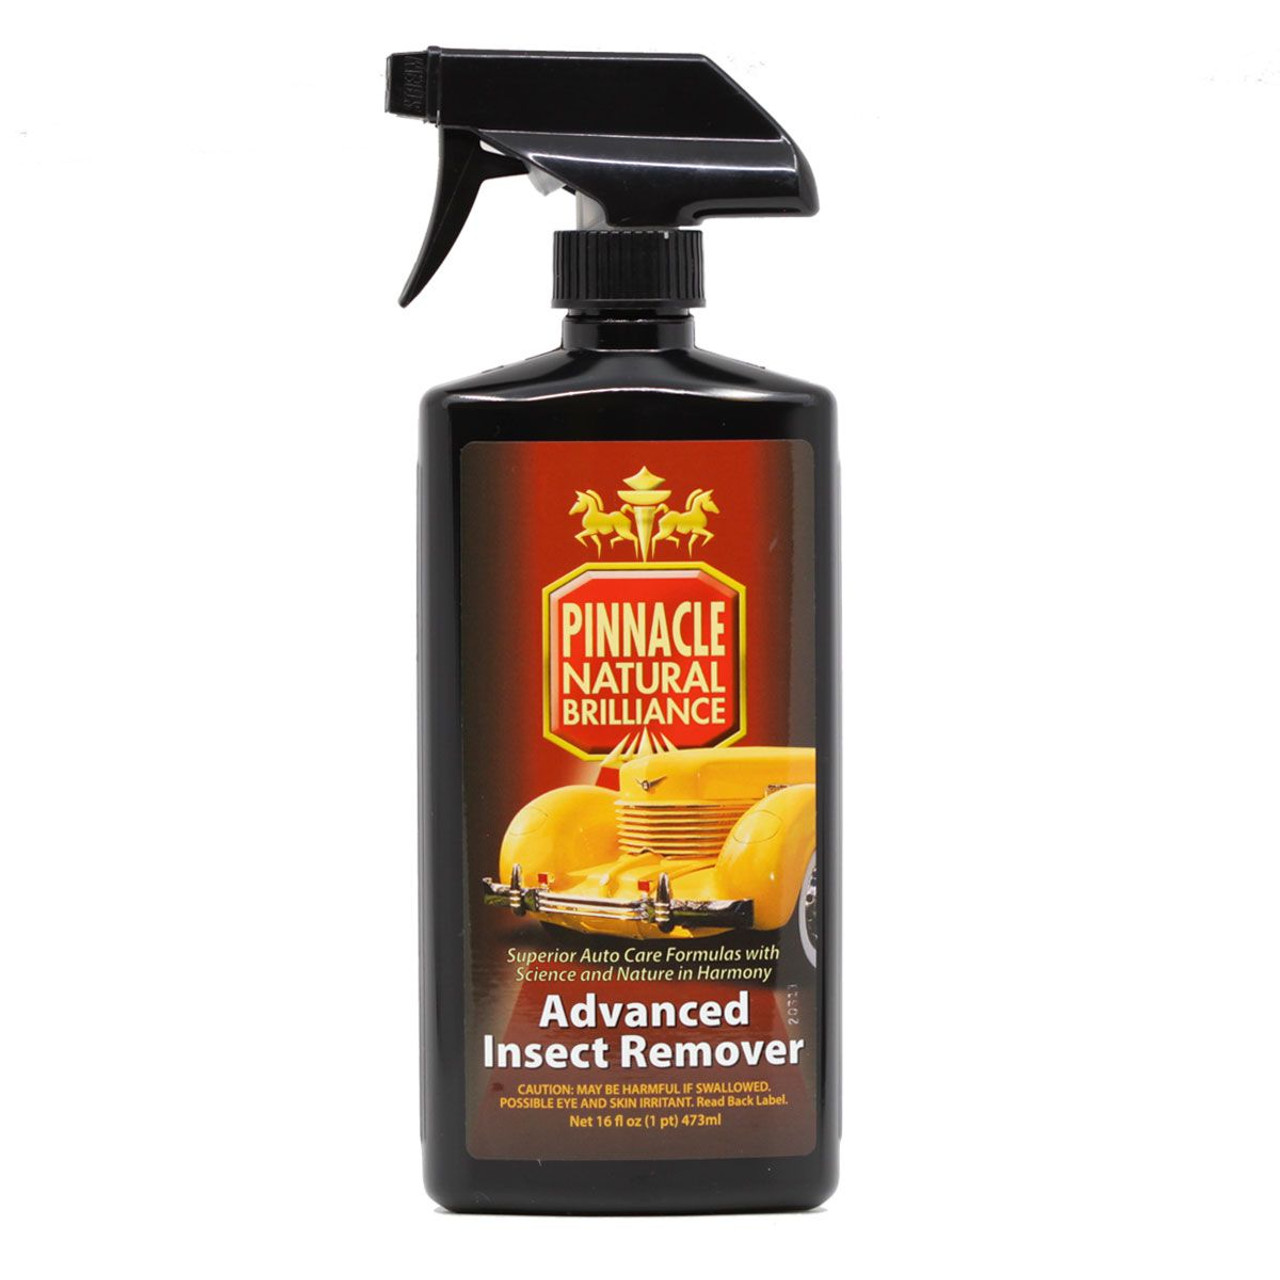 Bug and Tar Remover - Advance Auto Parts